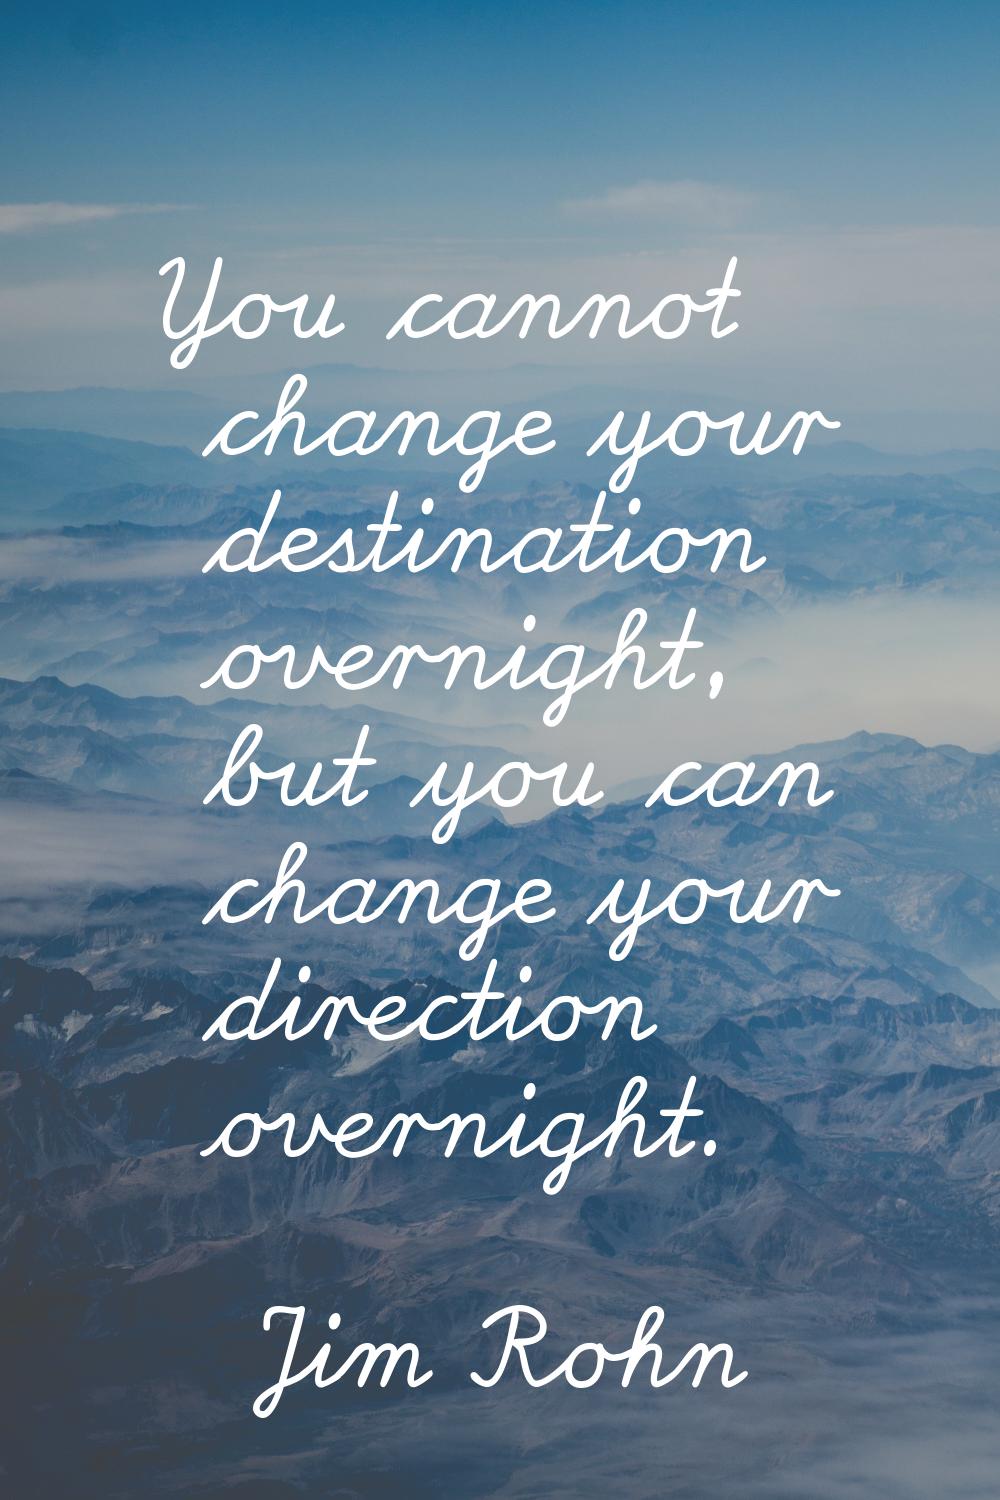 You cannot change your destination overnight, but you can change your direction overnight.